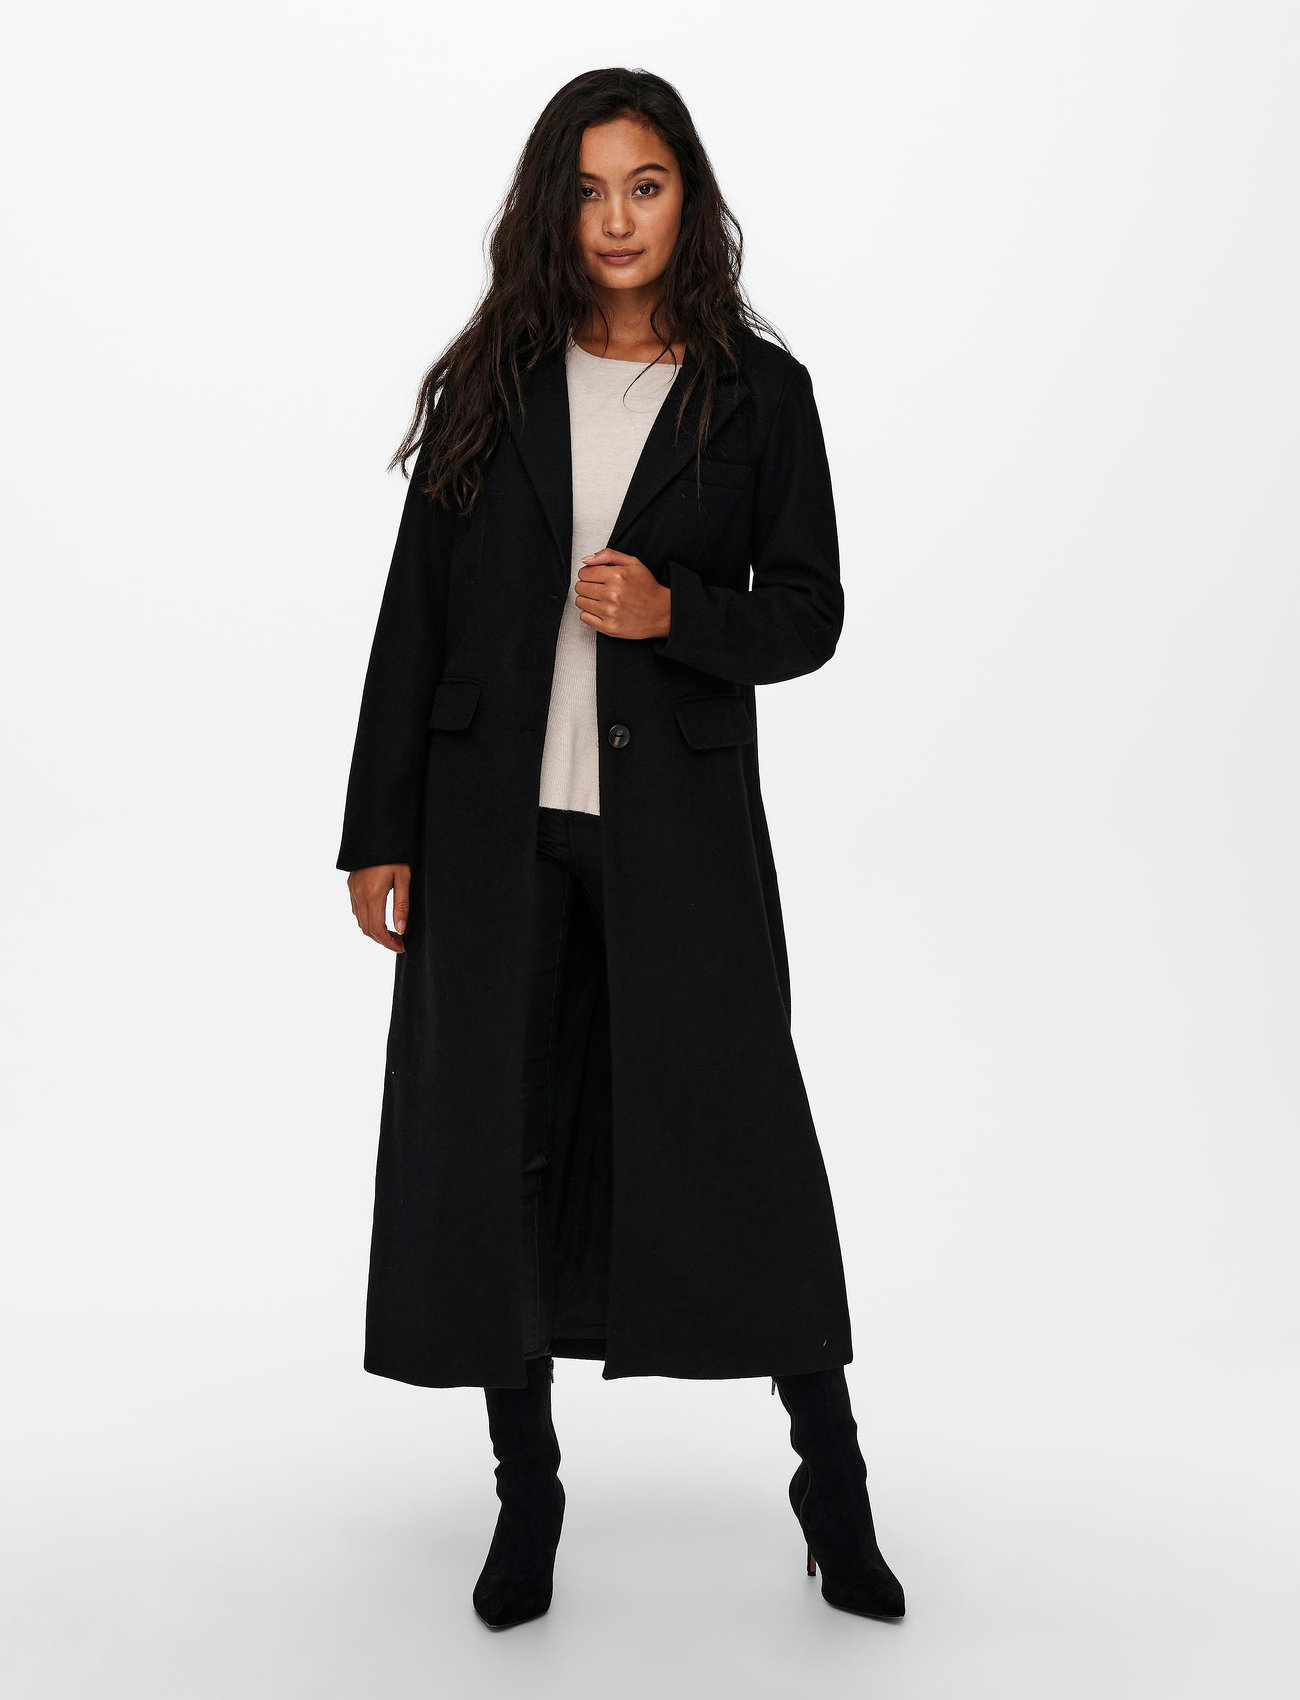 X-long at 69.99 returns Coat easy €. Boozt.com. Cc - and Buy ONLY Onlemma Otw Winter Coats delivery Fast ONLY online from